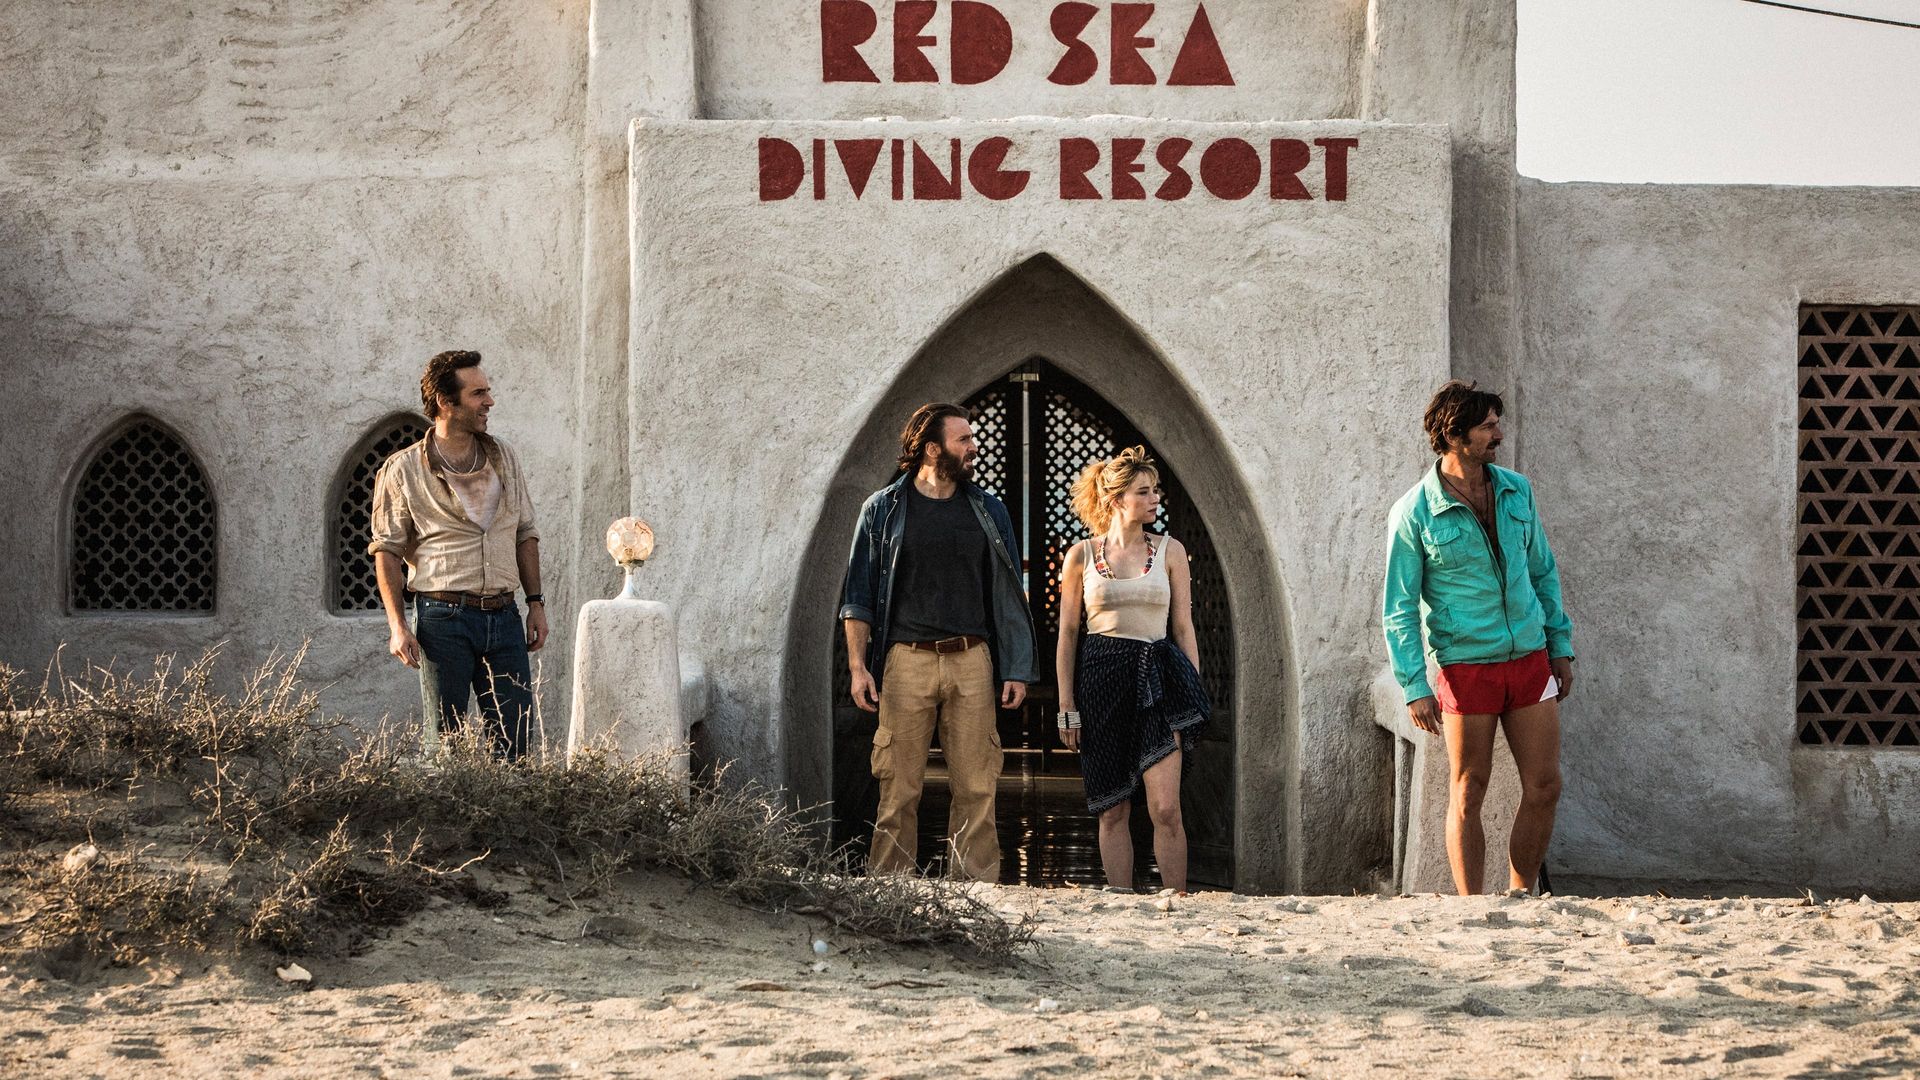 The Red Sea Diving Resort Backdrop